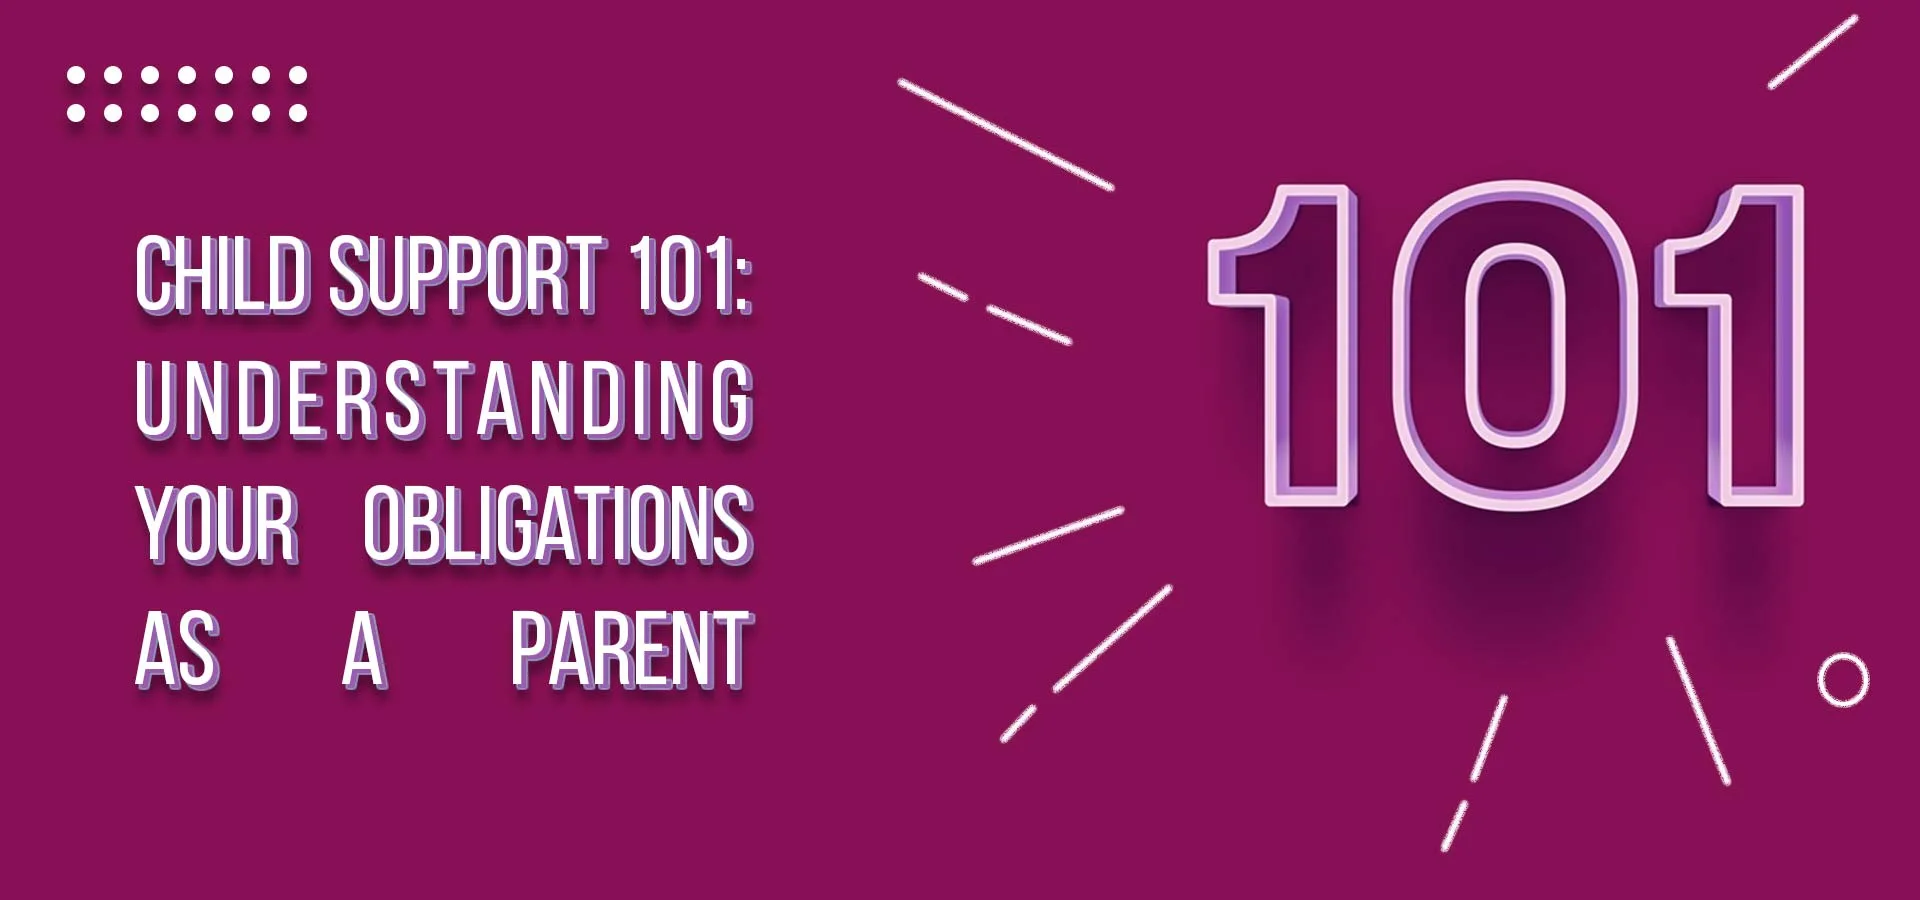 Child Support 101: Understanding Your Obligations as a Parent